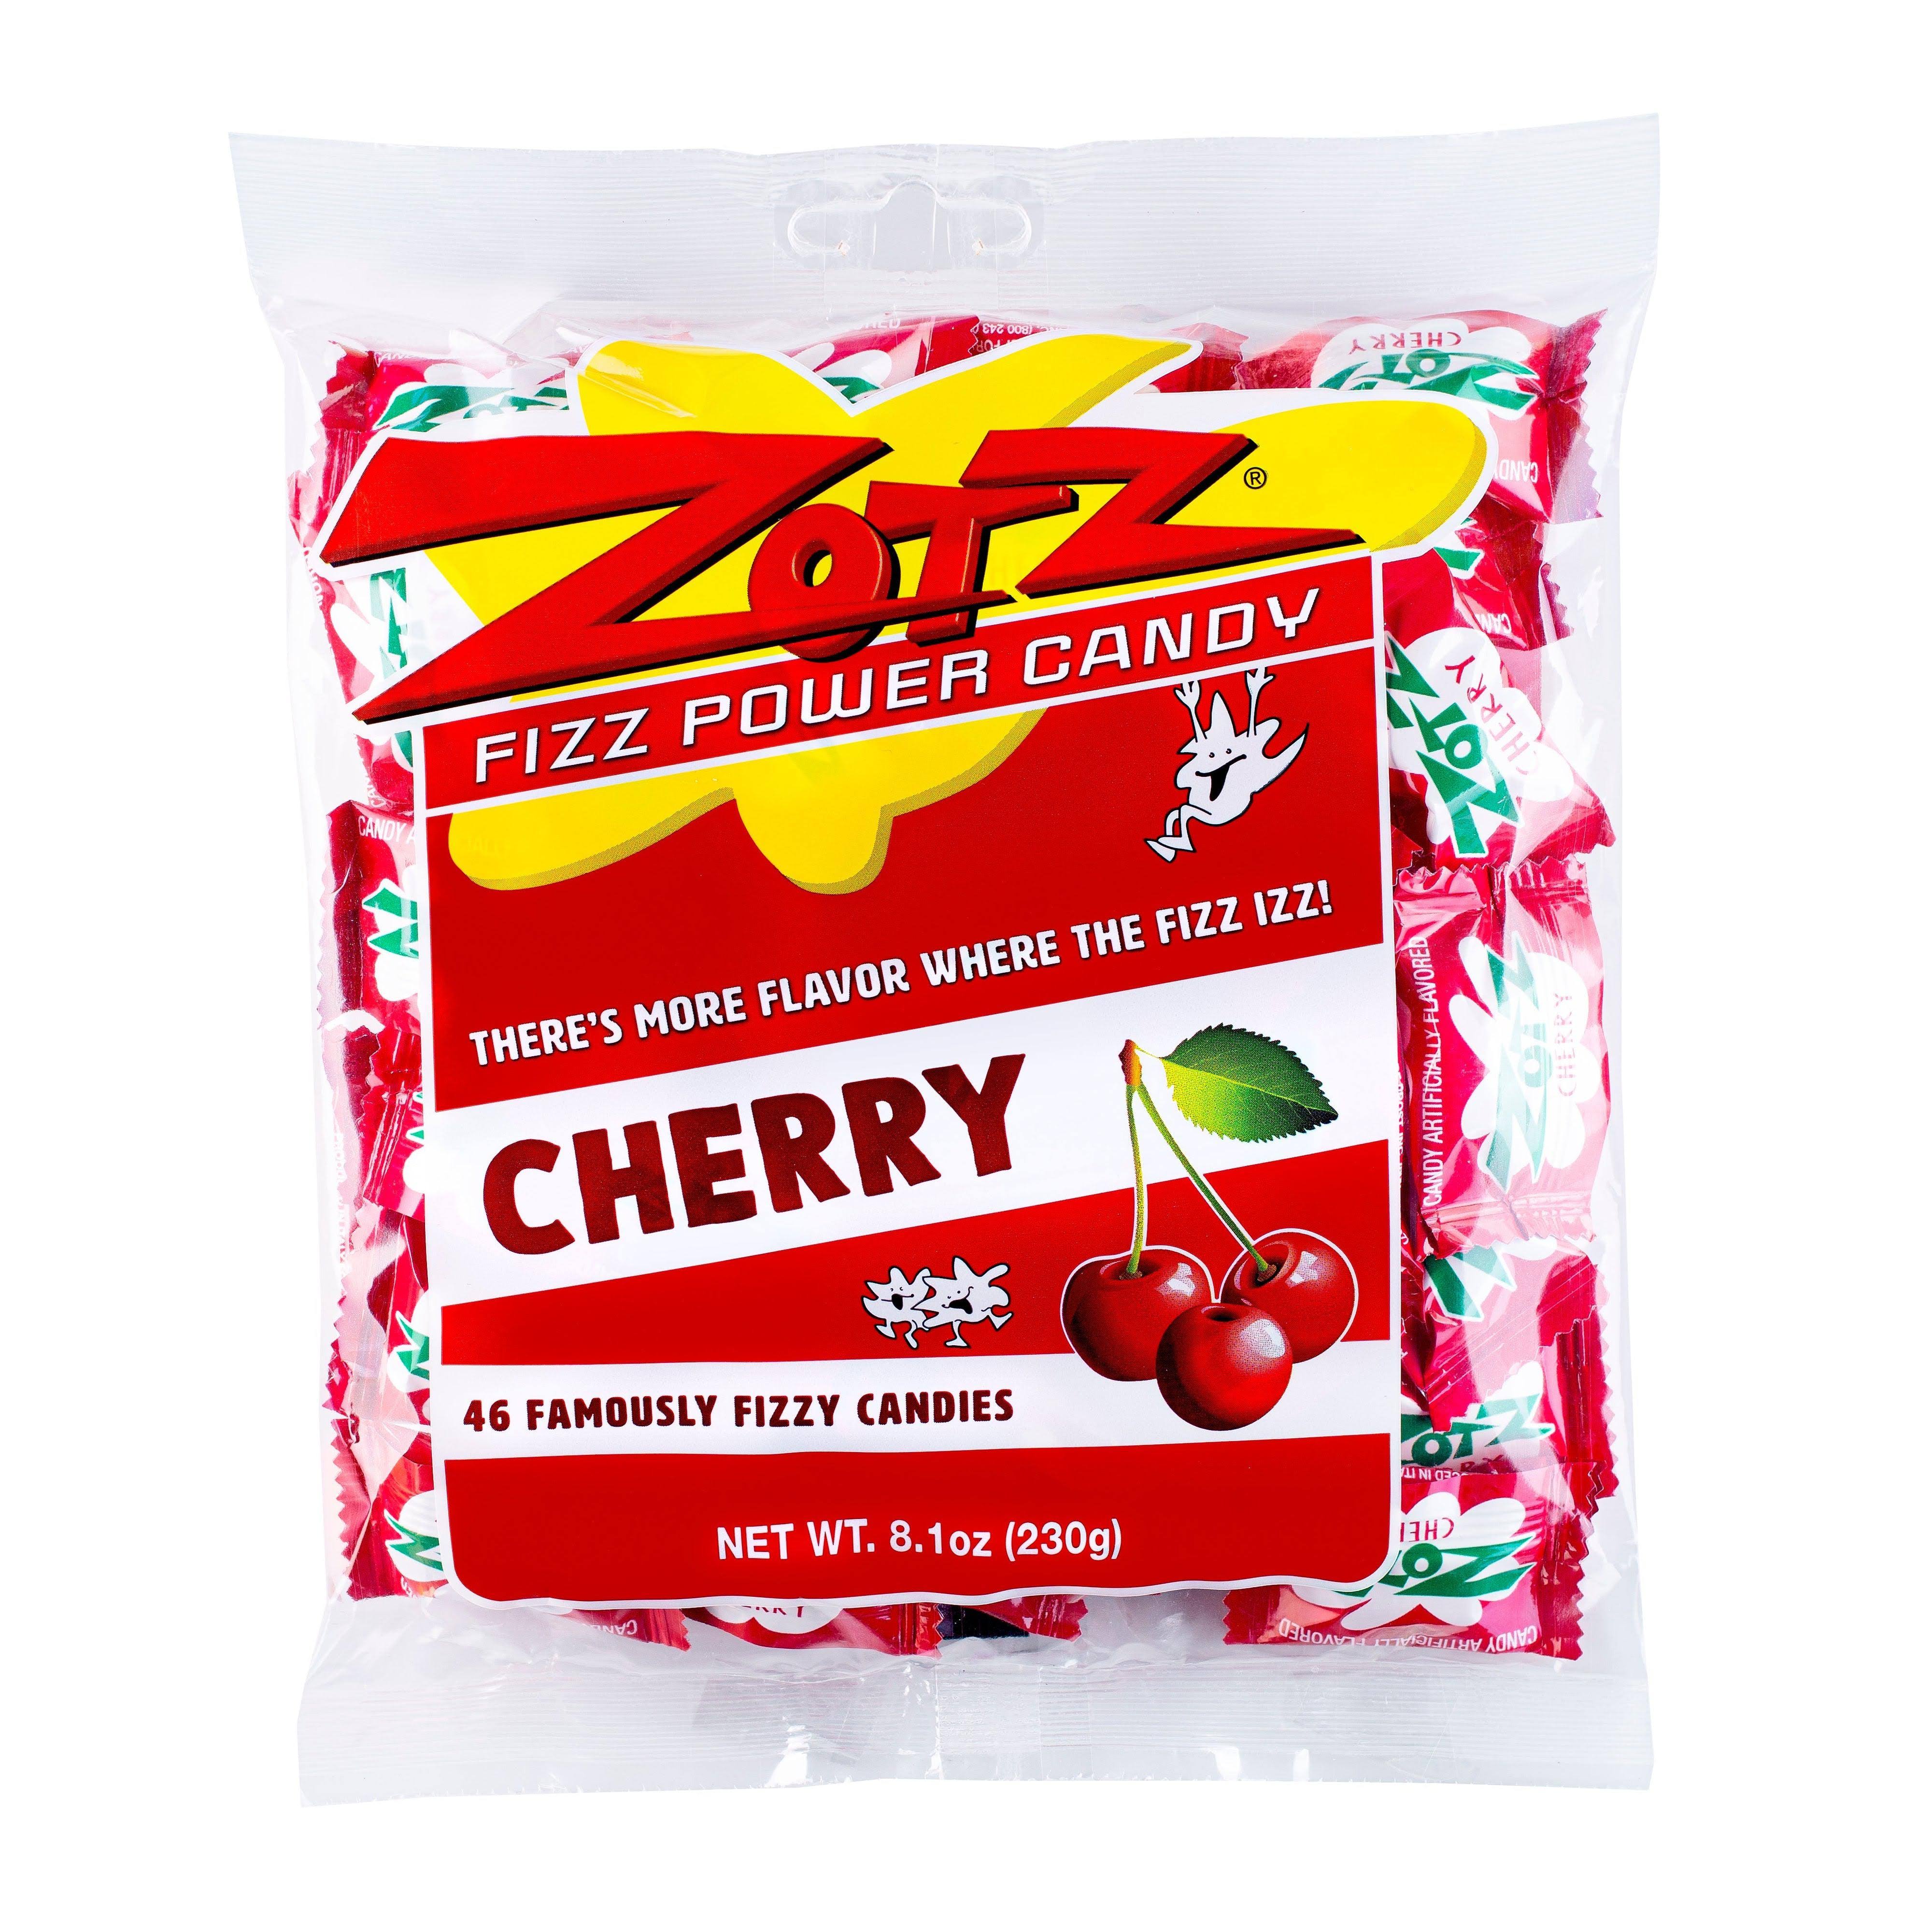 Zotz Fizz Power Candy Cherry - Fruit Flavored Hard Candy With A Fizzy Center